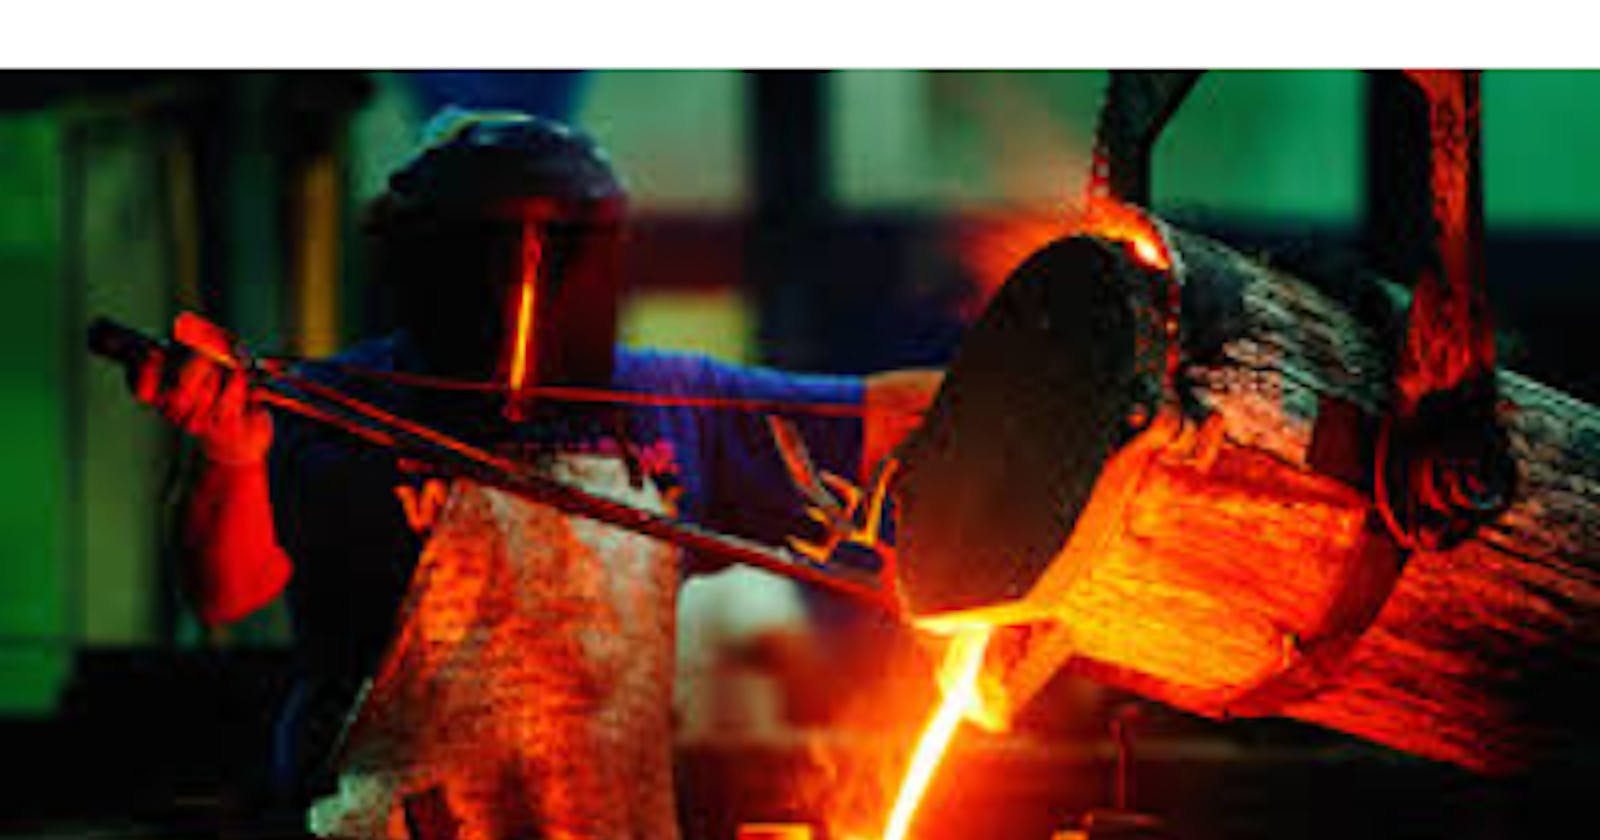 Metal Casting Market: Metal Casting To Grow at 8.7% CAGR During 2021-2028